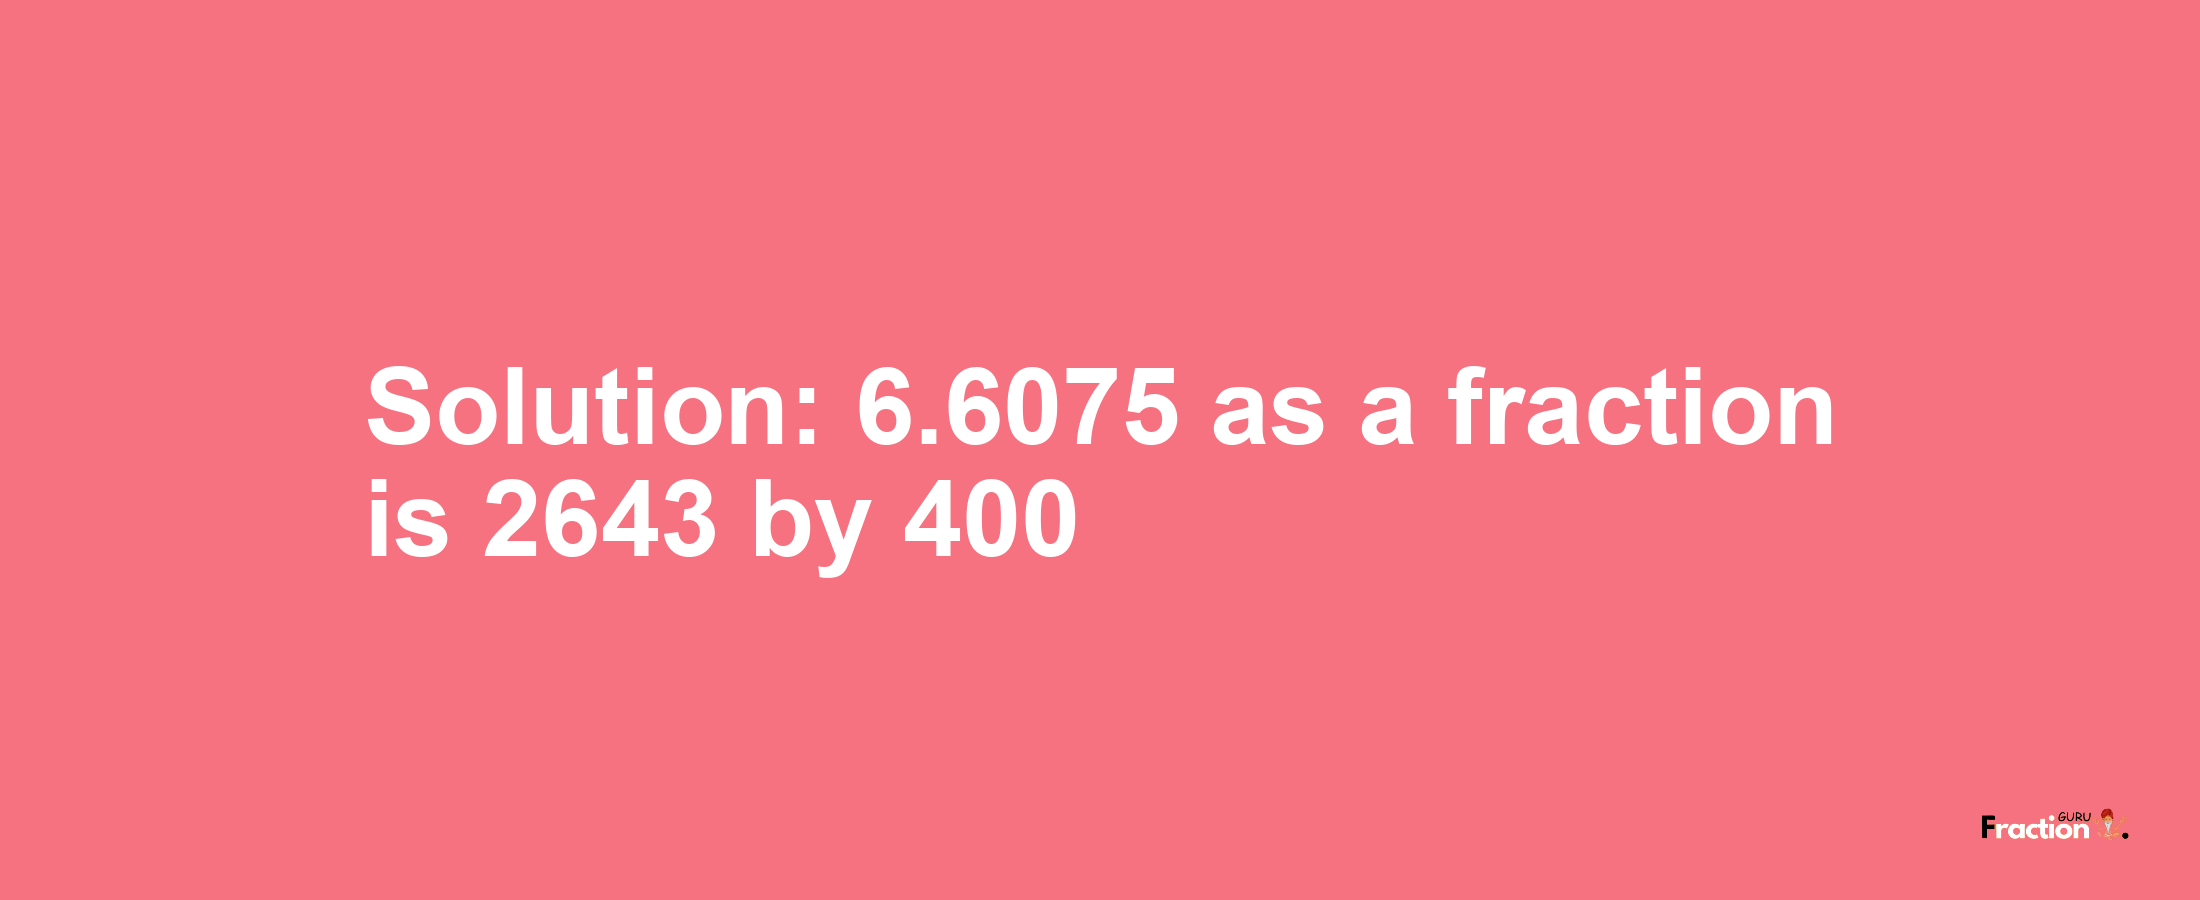 Solution:6.6075 as a fraction is 2643/400